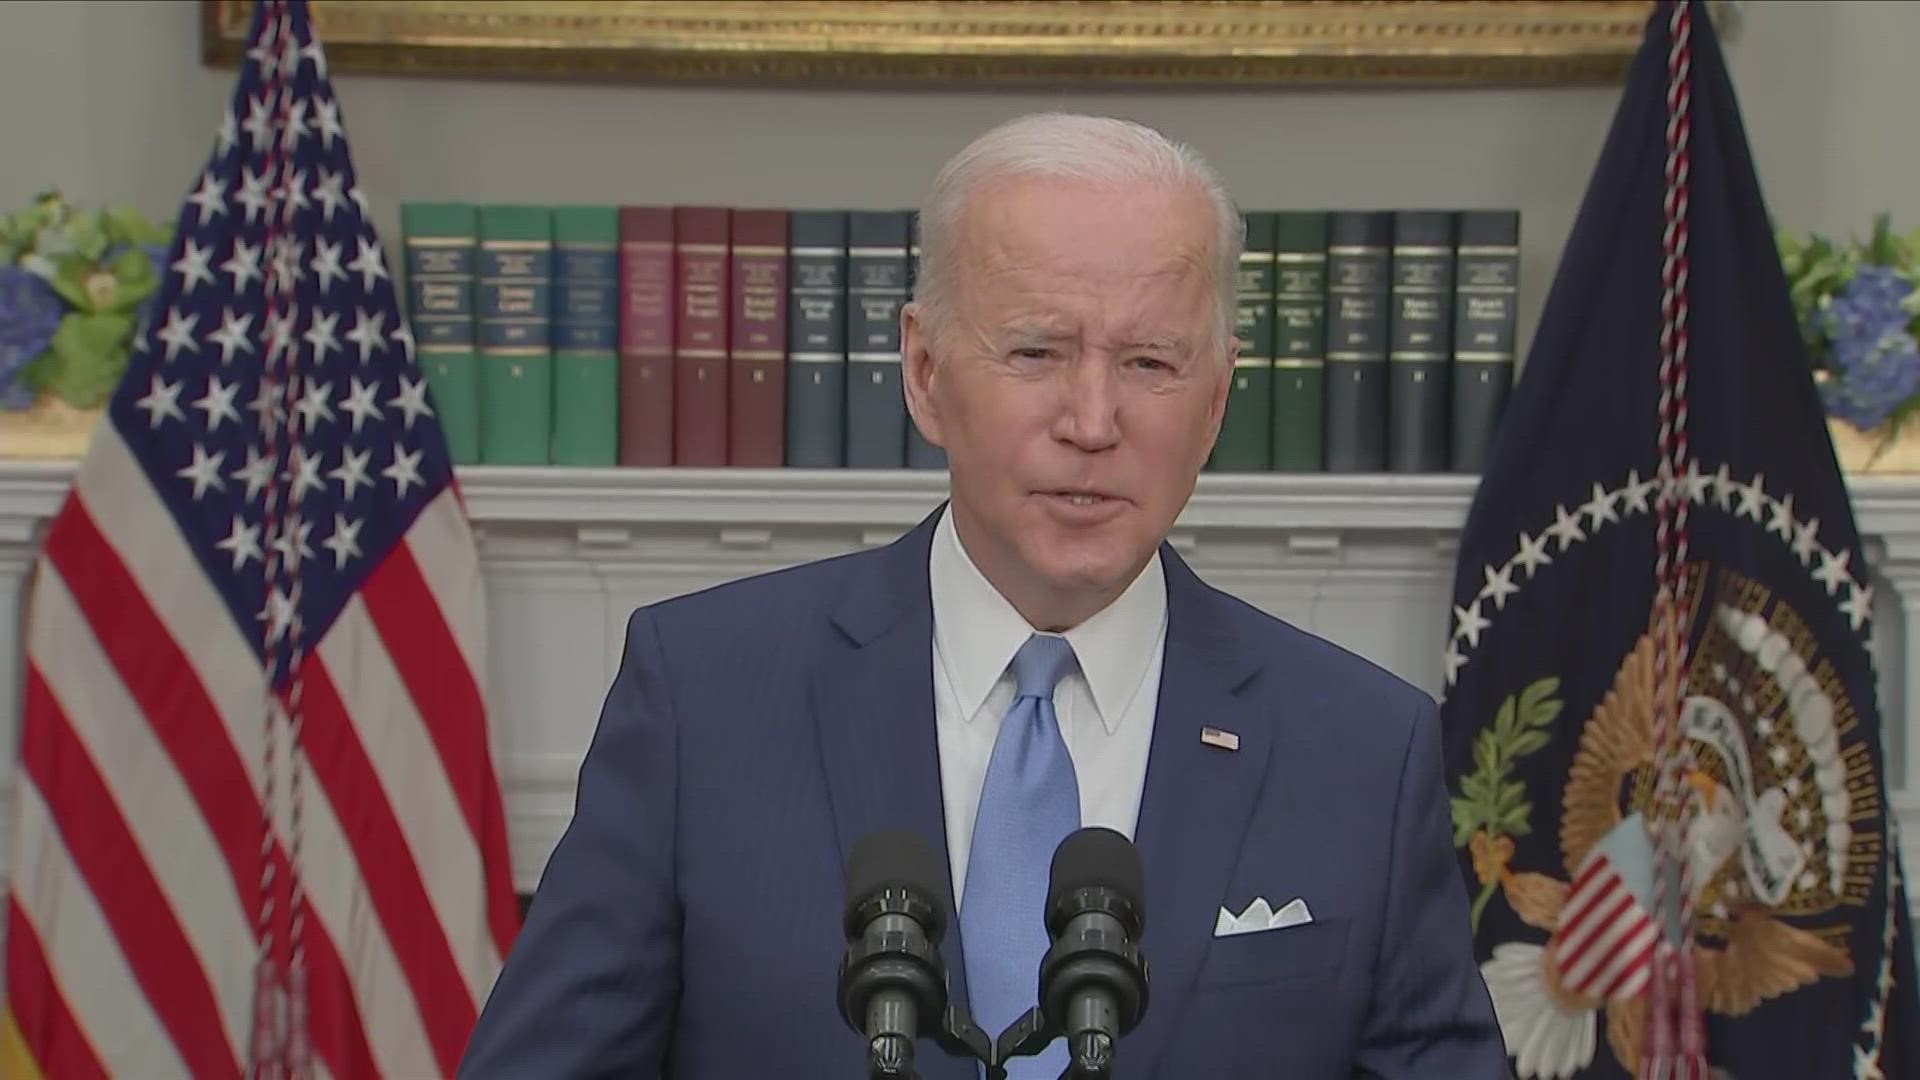 President Joe Biden said he will finalize his choice to replace Justice Stephen Breyer by the end of February.